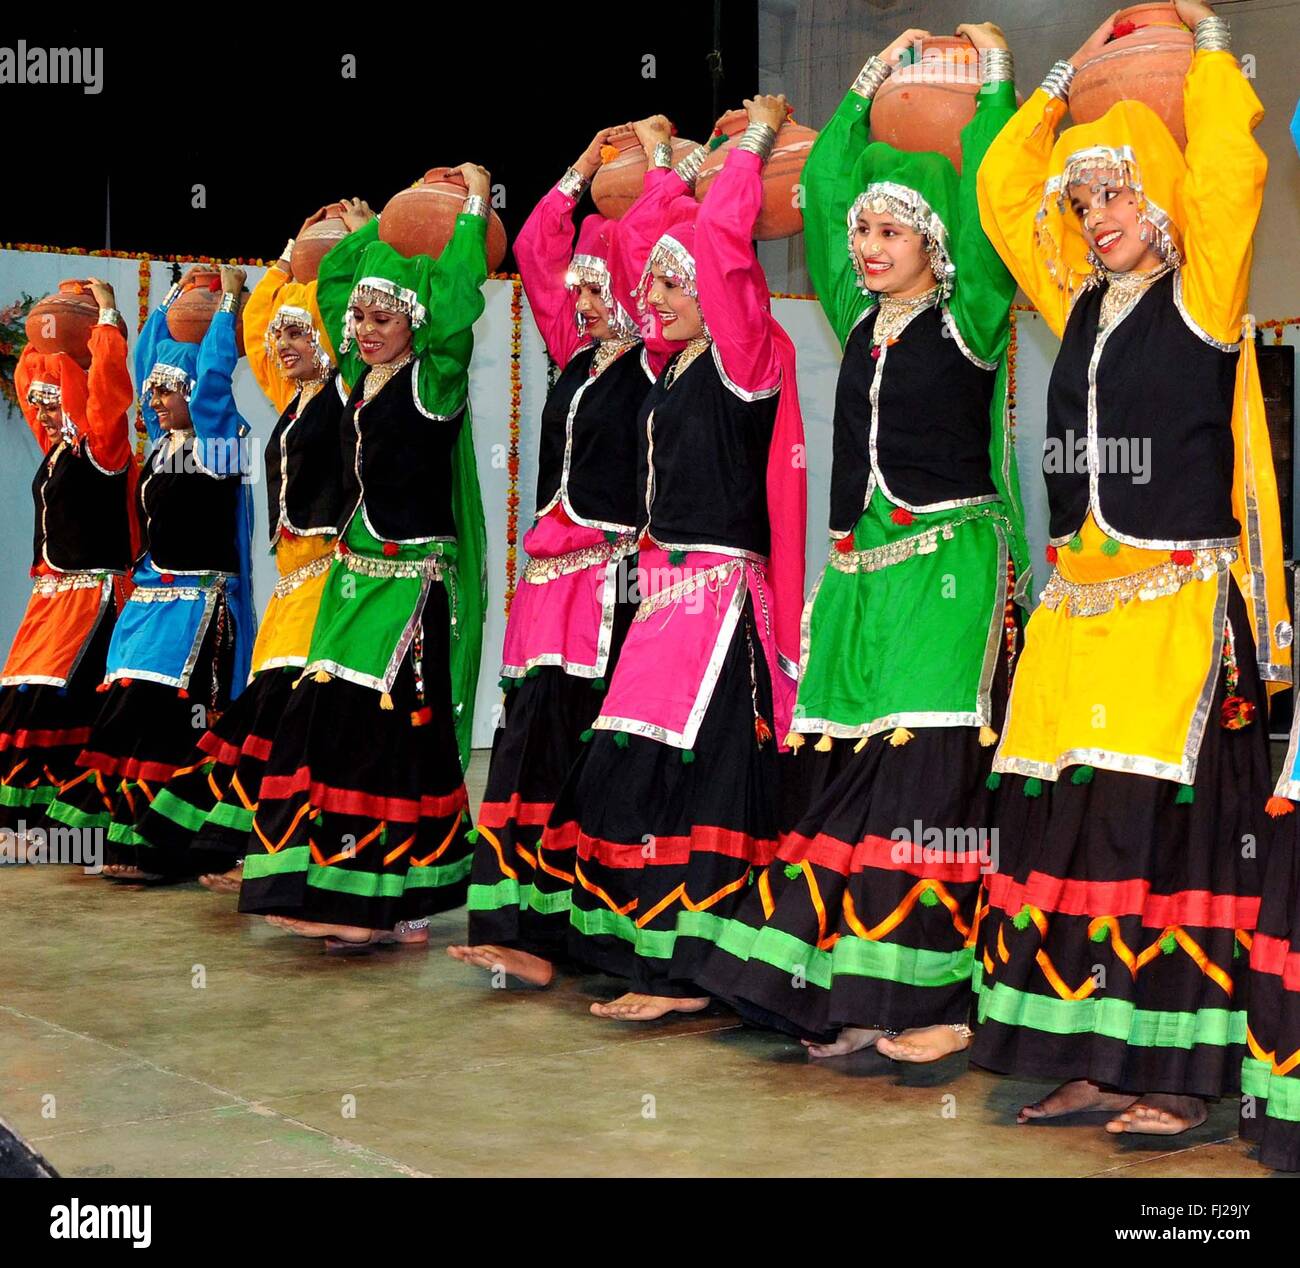 Patiala, India. 11th Feb, 2016. Girls students perform Punjabi folk dance Sammi during the Punjabi University Folk Festival at Punjabi University. Sammi Dance is a folk dance of the Punjab state of India. It originated from the tribal communities of Punjab and is performed by the women of Baazigar, Rai, Lobana and Sansi tribes. The costume of this dance is colorful and it's a treat to experience Sammi dance. The dancers usually dress themselves in bright colored kurtas and full flowing skirts called lehengas. © Rajesh Sachar/Pacific Press/Alamy Live News Stock Photo